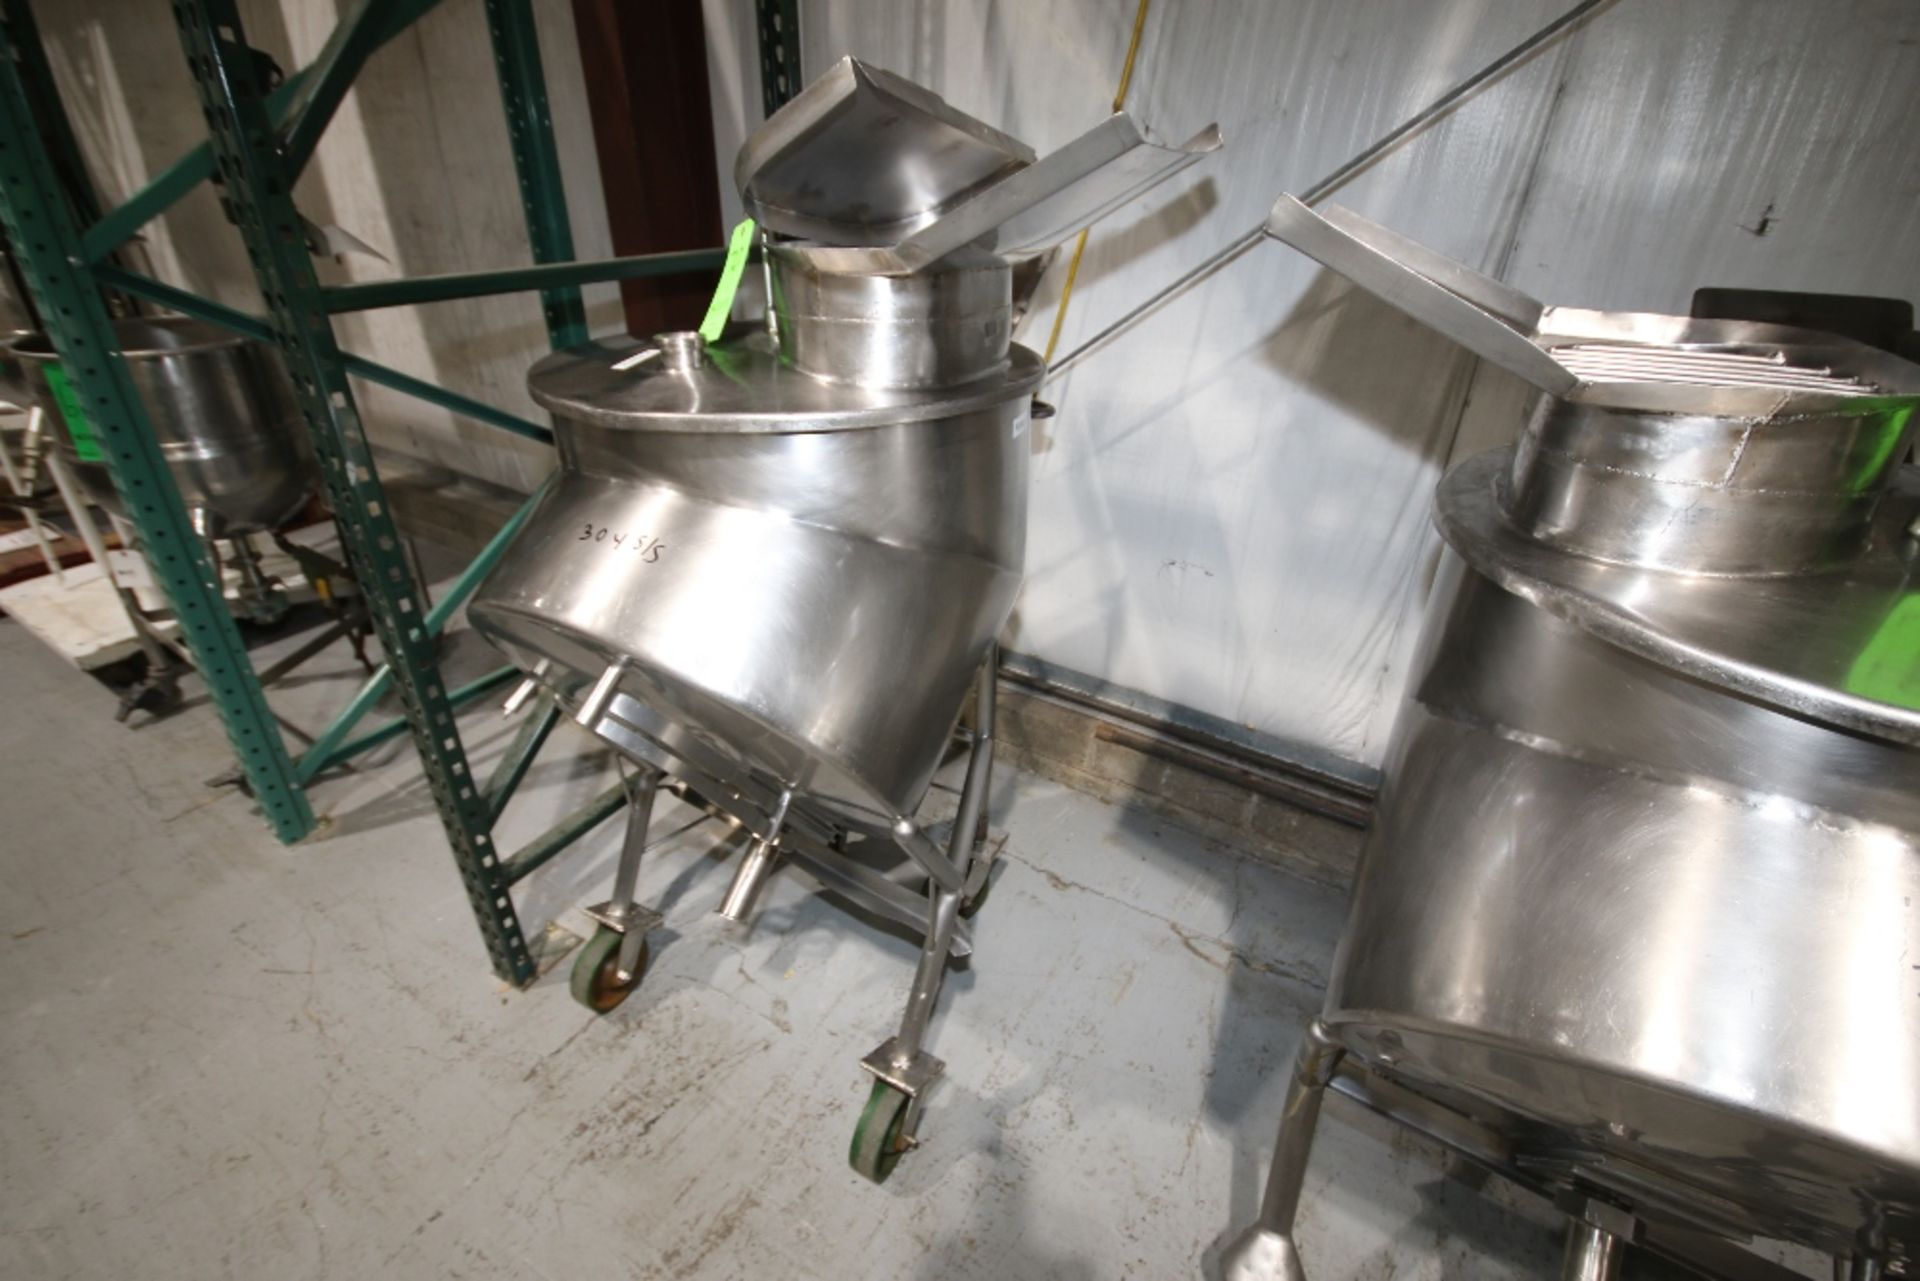 Approx. 60 Portable S/S Kettle, 304 S/S, Mounted on Portable Frame with Sweep/Scrape Agitation,